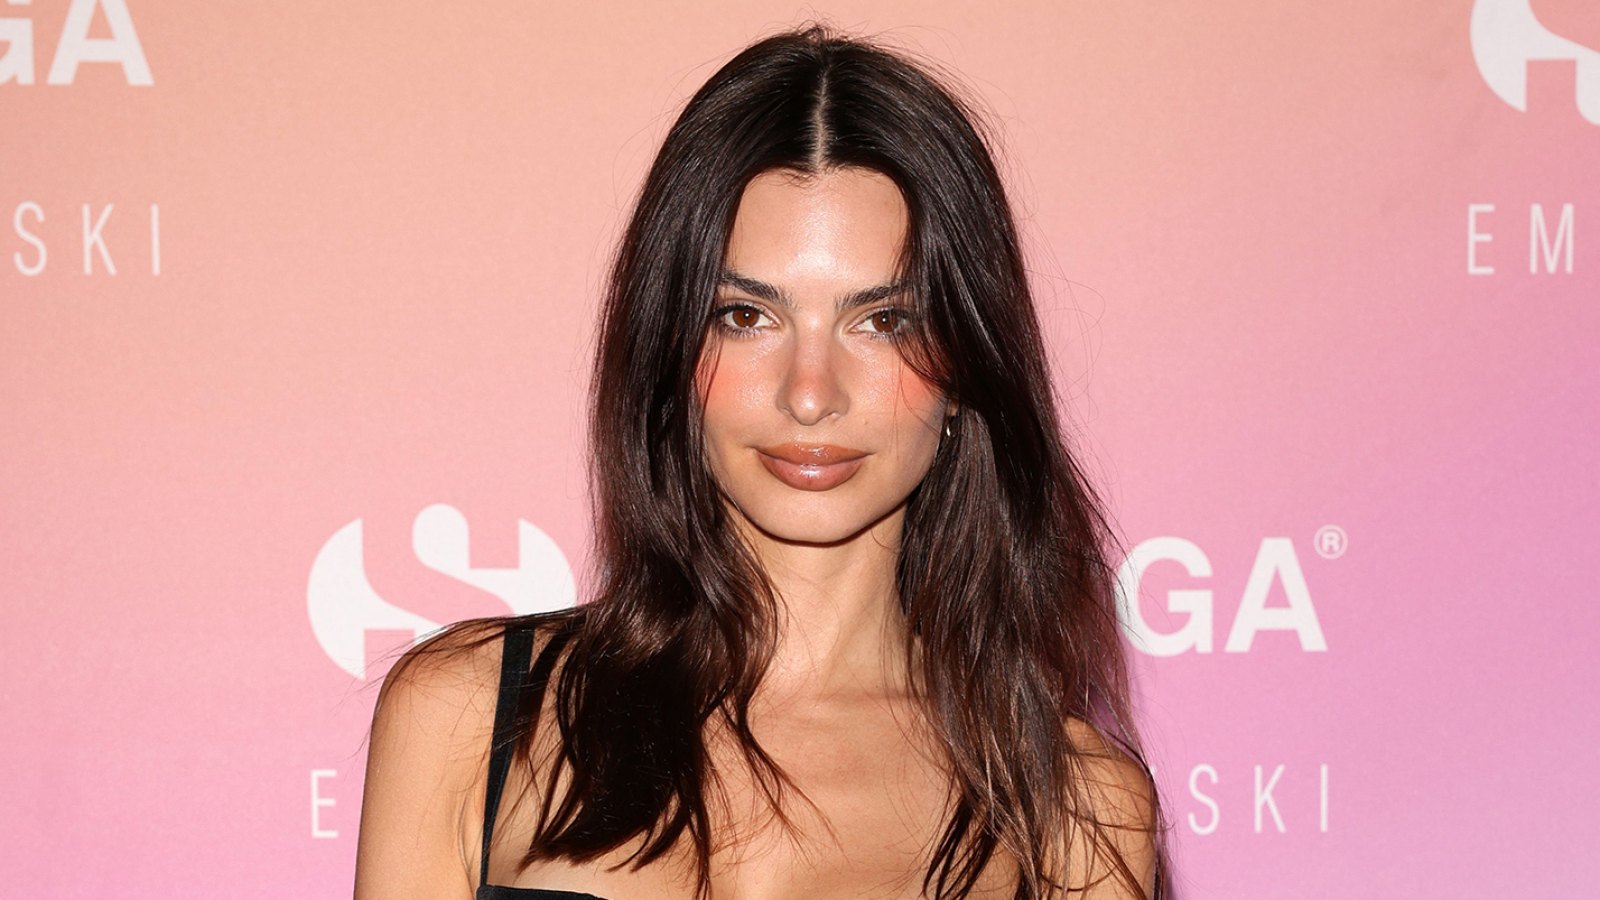 Emily Ratajkowski Wears Black Dress and Poses in front of a pastel gradient backdrop red carpet for the Superga Party in Florence, Italy